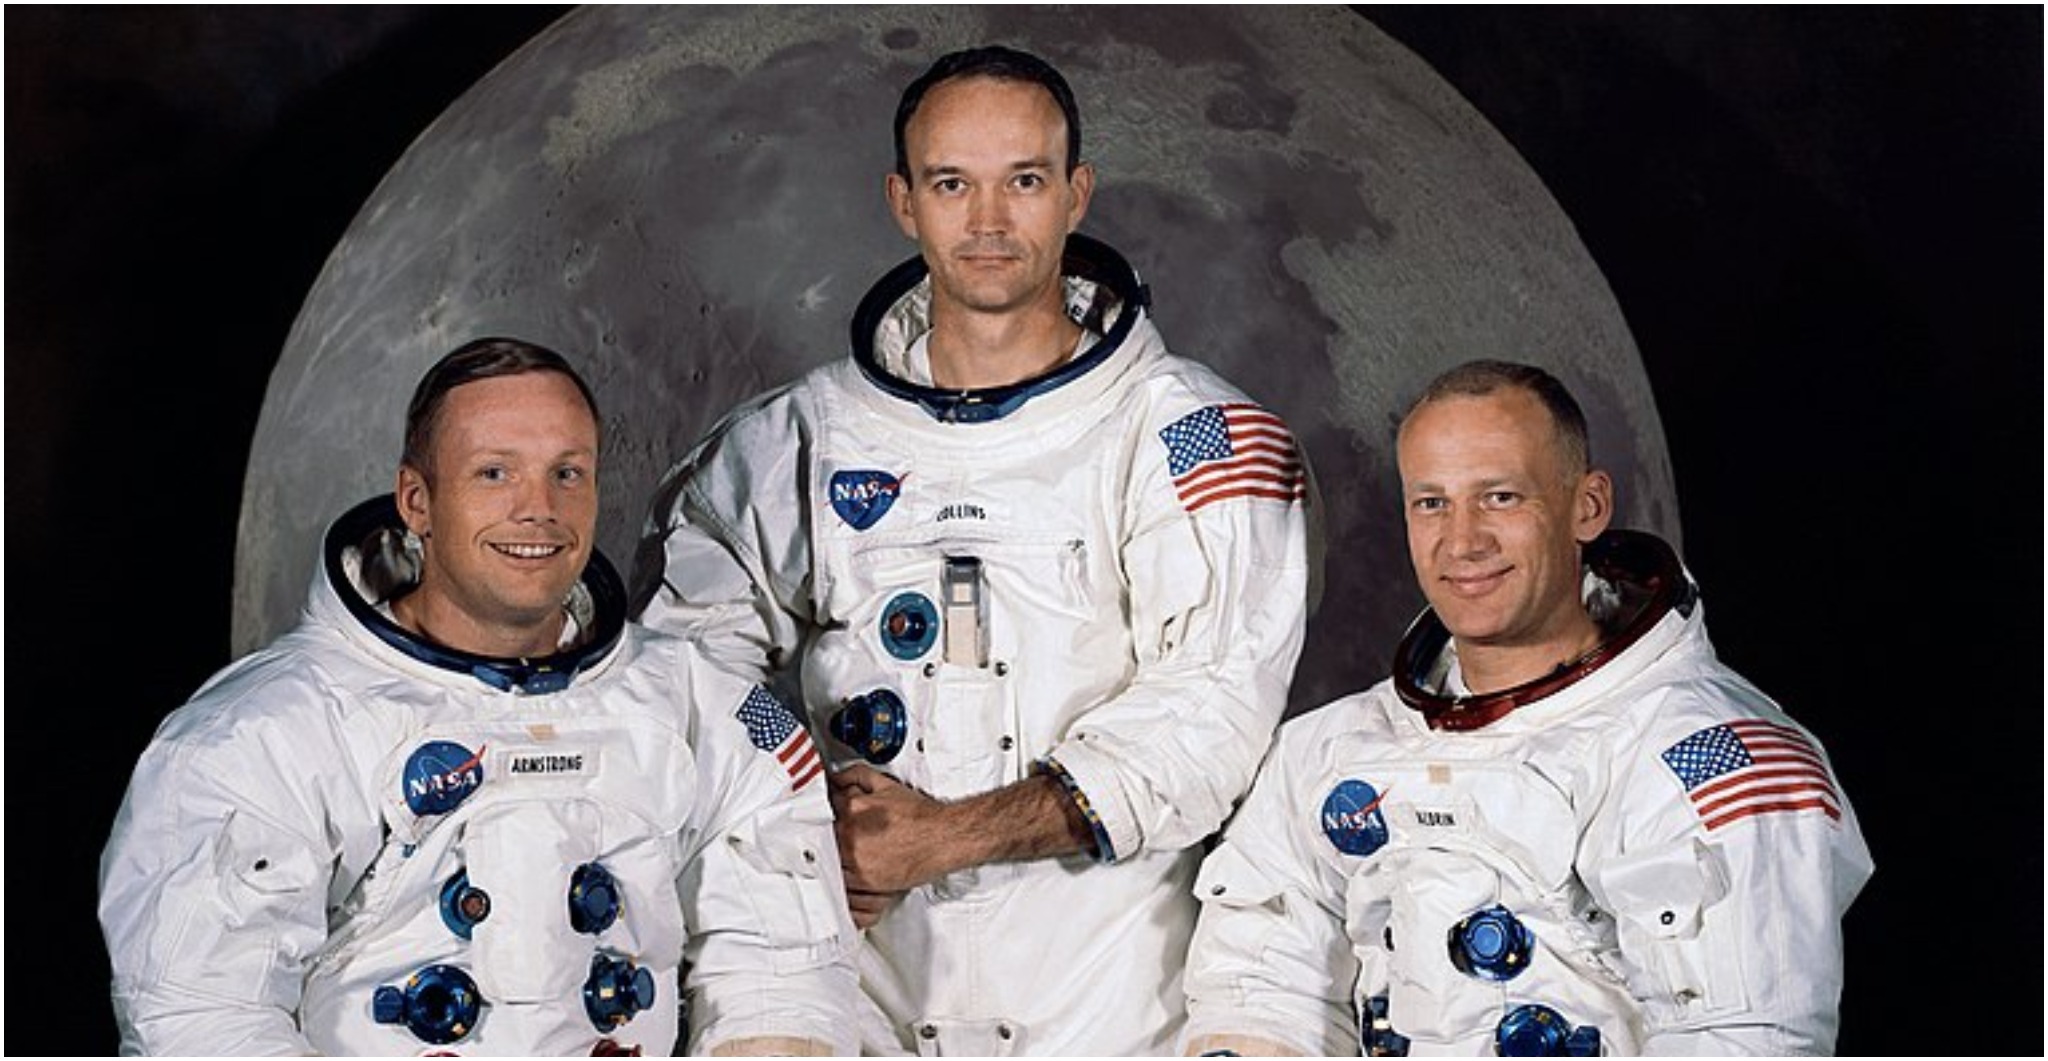  The Apollo 11 lunar landing mission crew, pictured from left to right, Neil A. Armstrong, commander; Michael Collins, command module pilot; and Edwin E. Aldrin Jr., lunar module pilot.